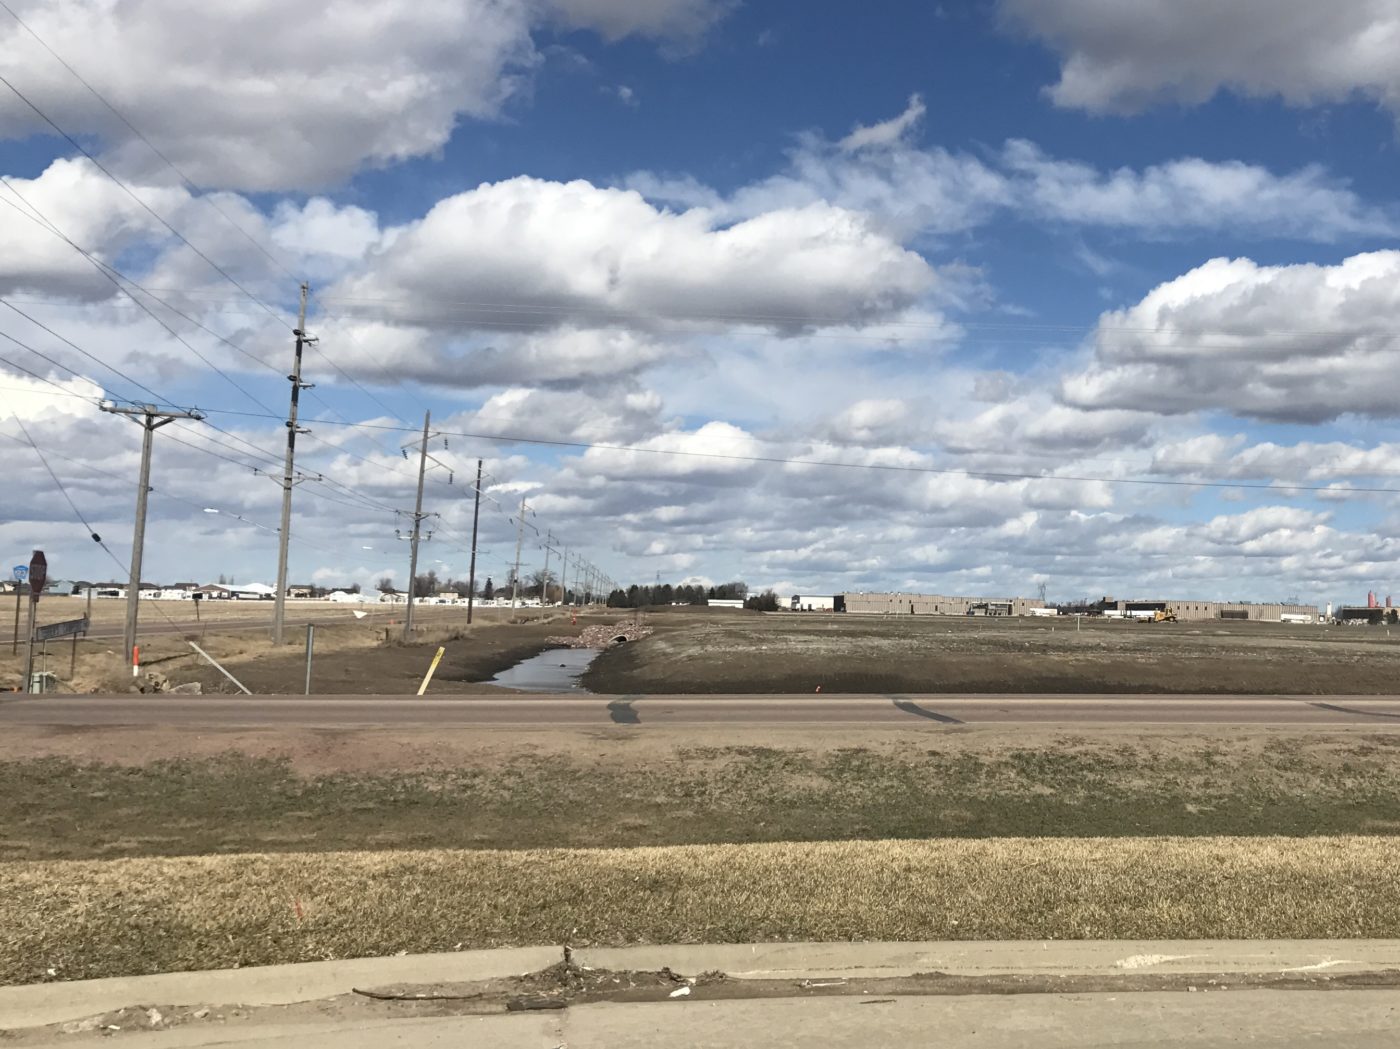 Image of Fareway grocery store's construction site in Harrisbug, SD